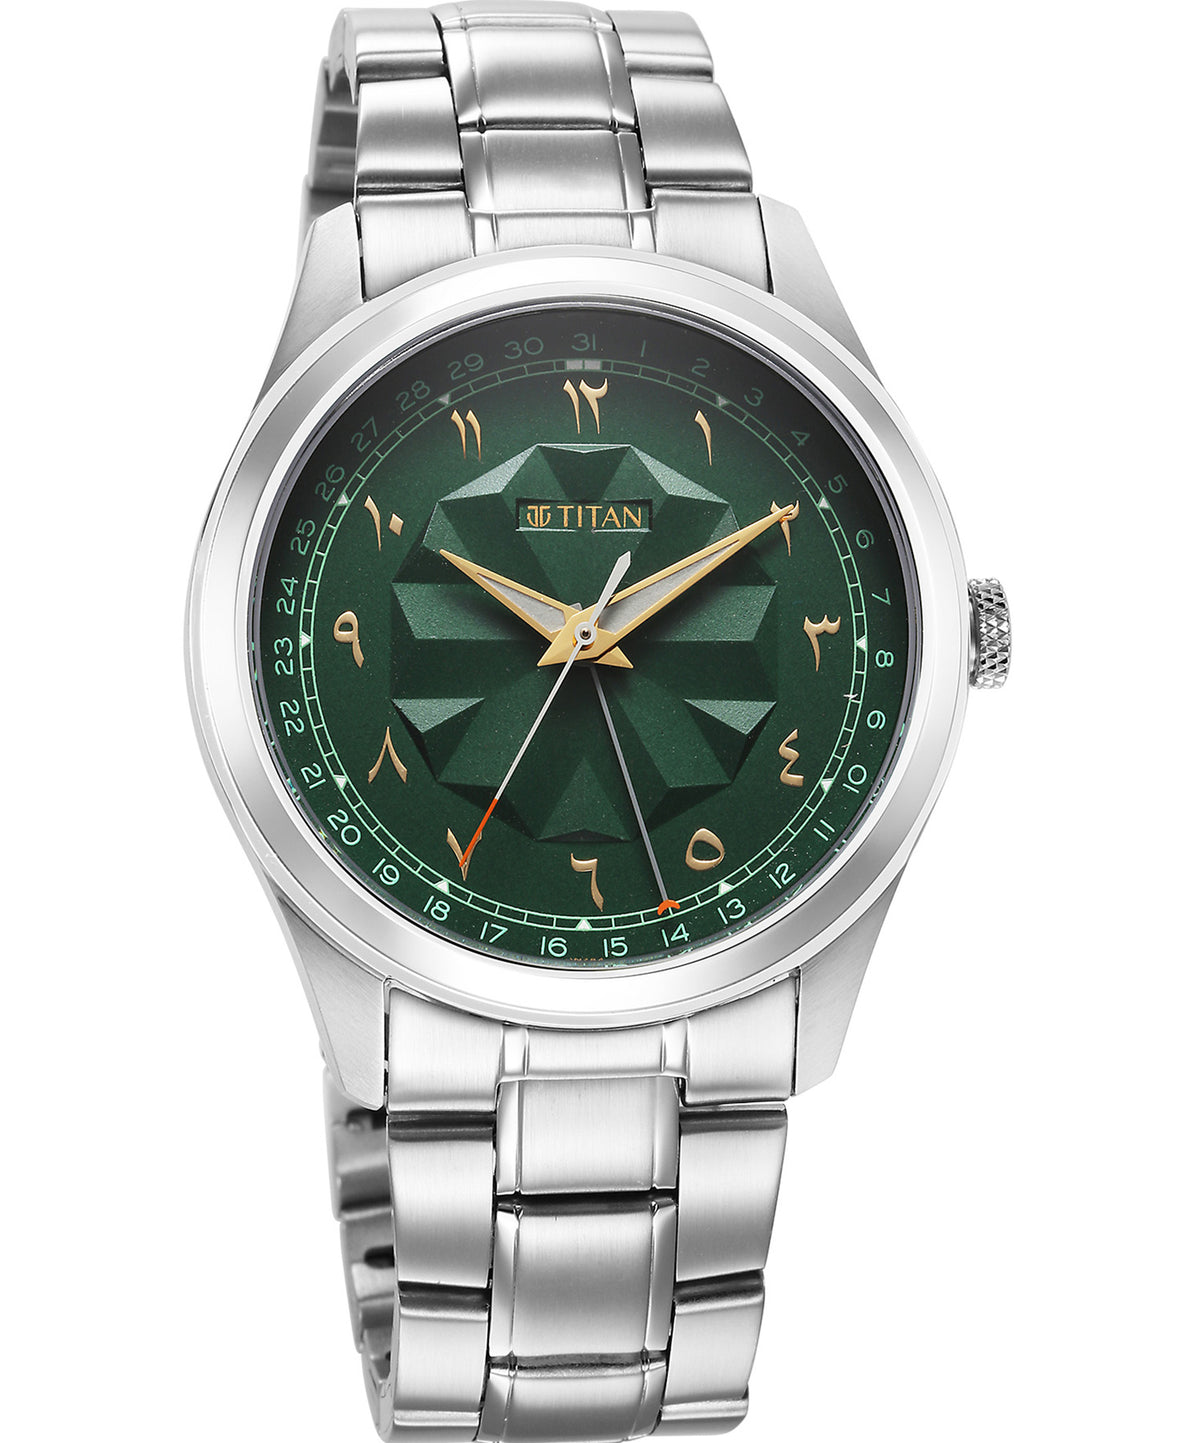 Titan Men's Watch Arabic Classique Collection, Green Dial Silver Stainless Steel Strap, 1805SM06